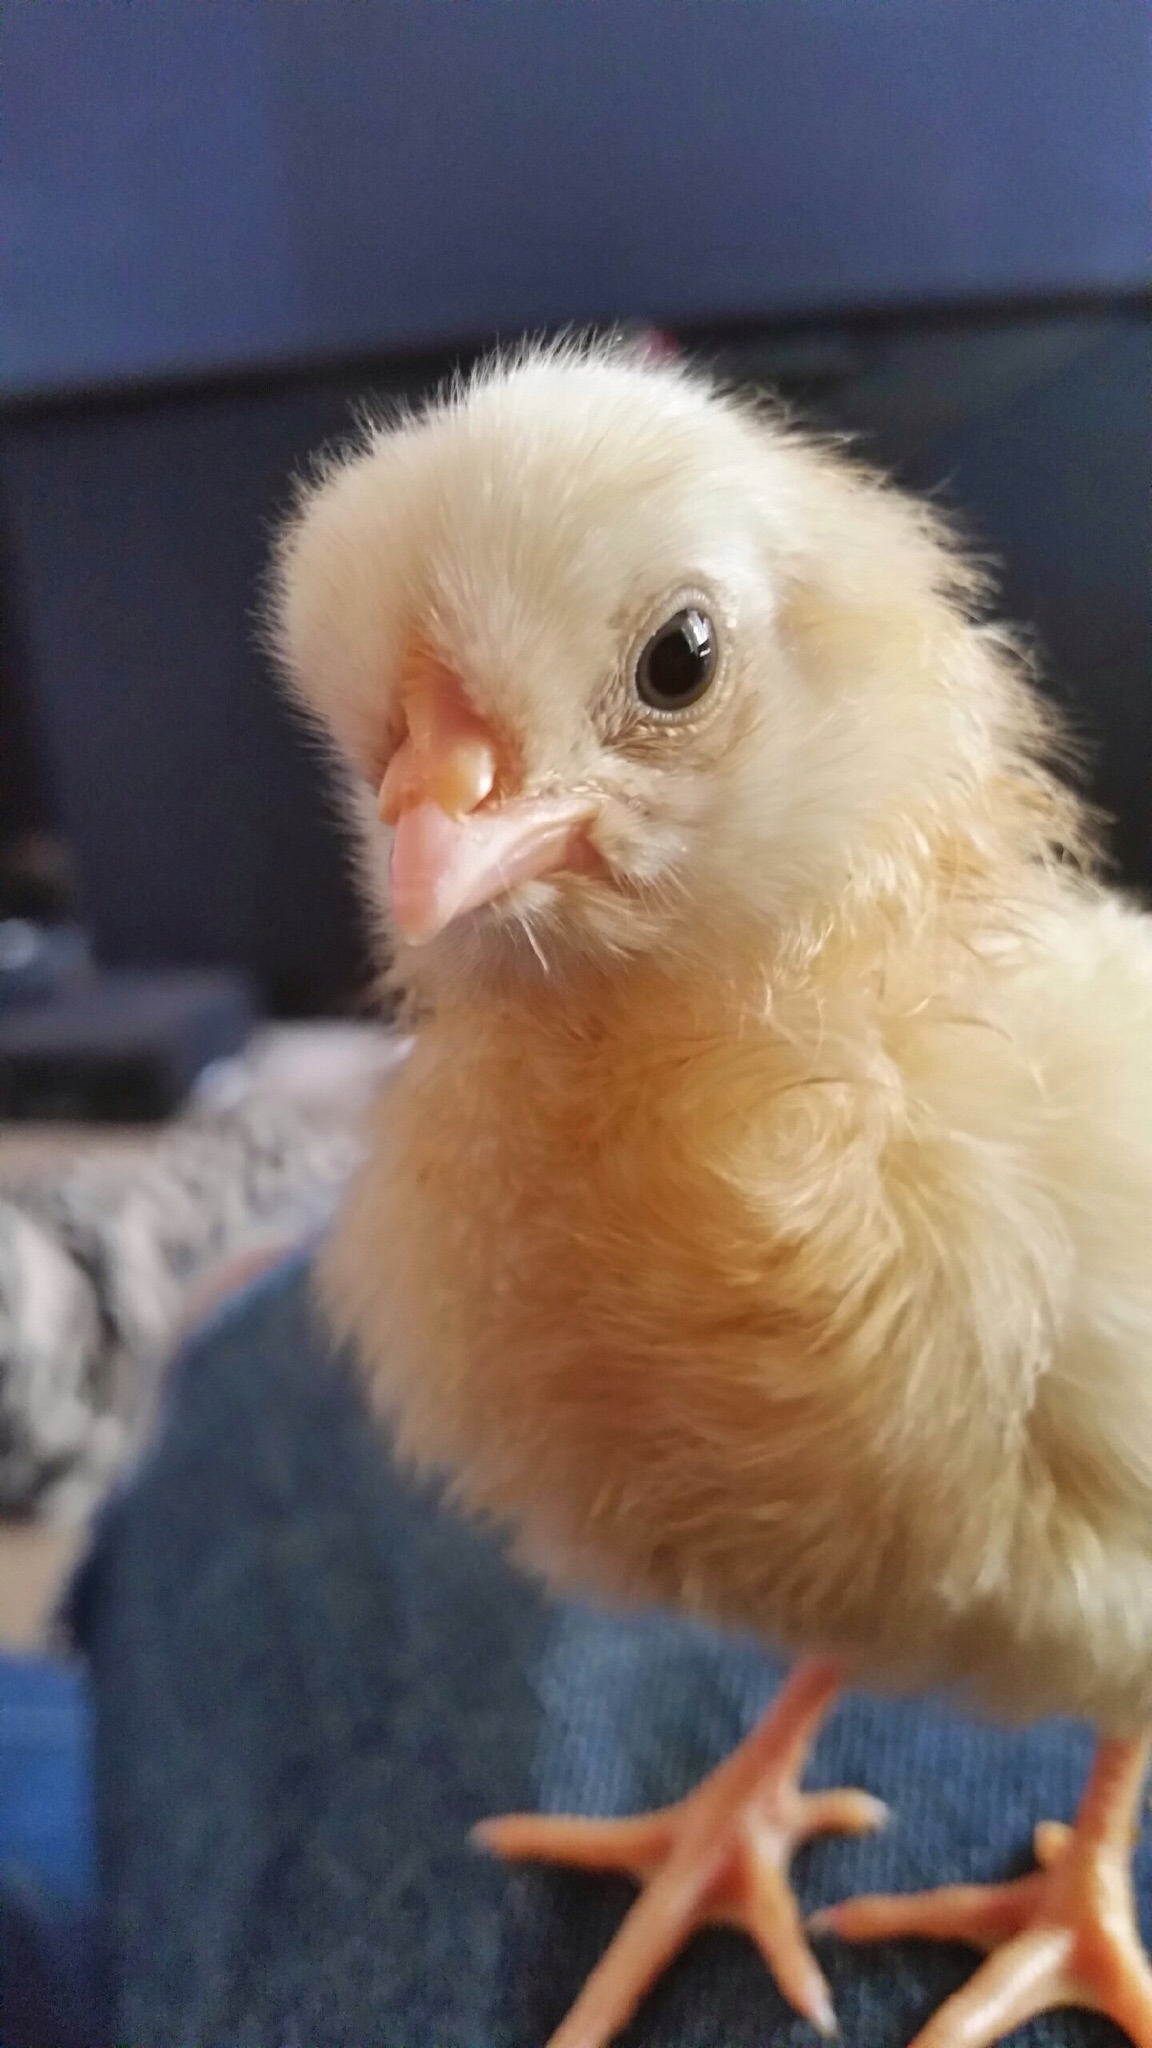 My rooster butterscotch when he was a baby but when he grew up we had to give him away